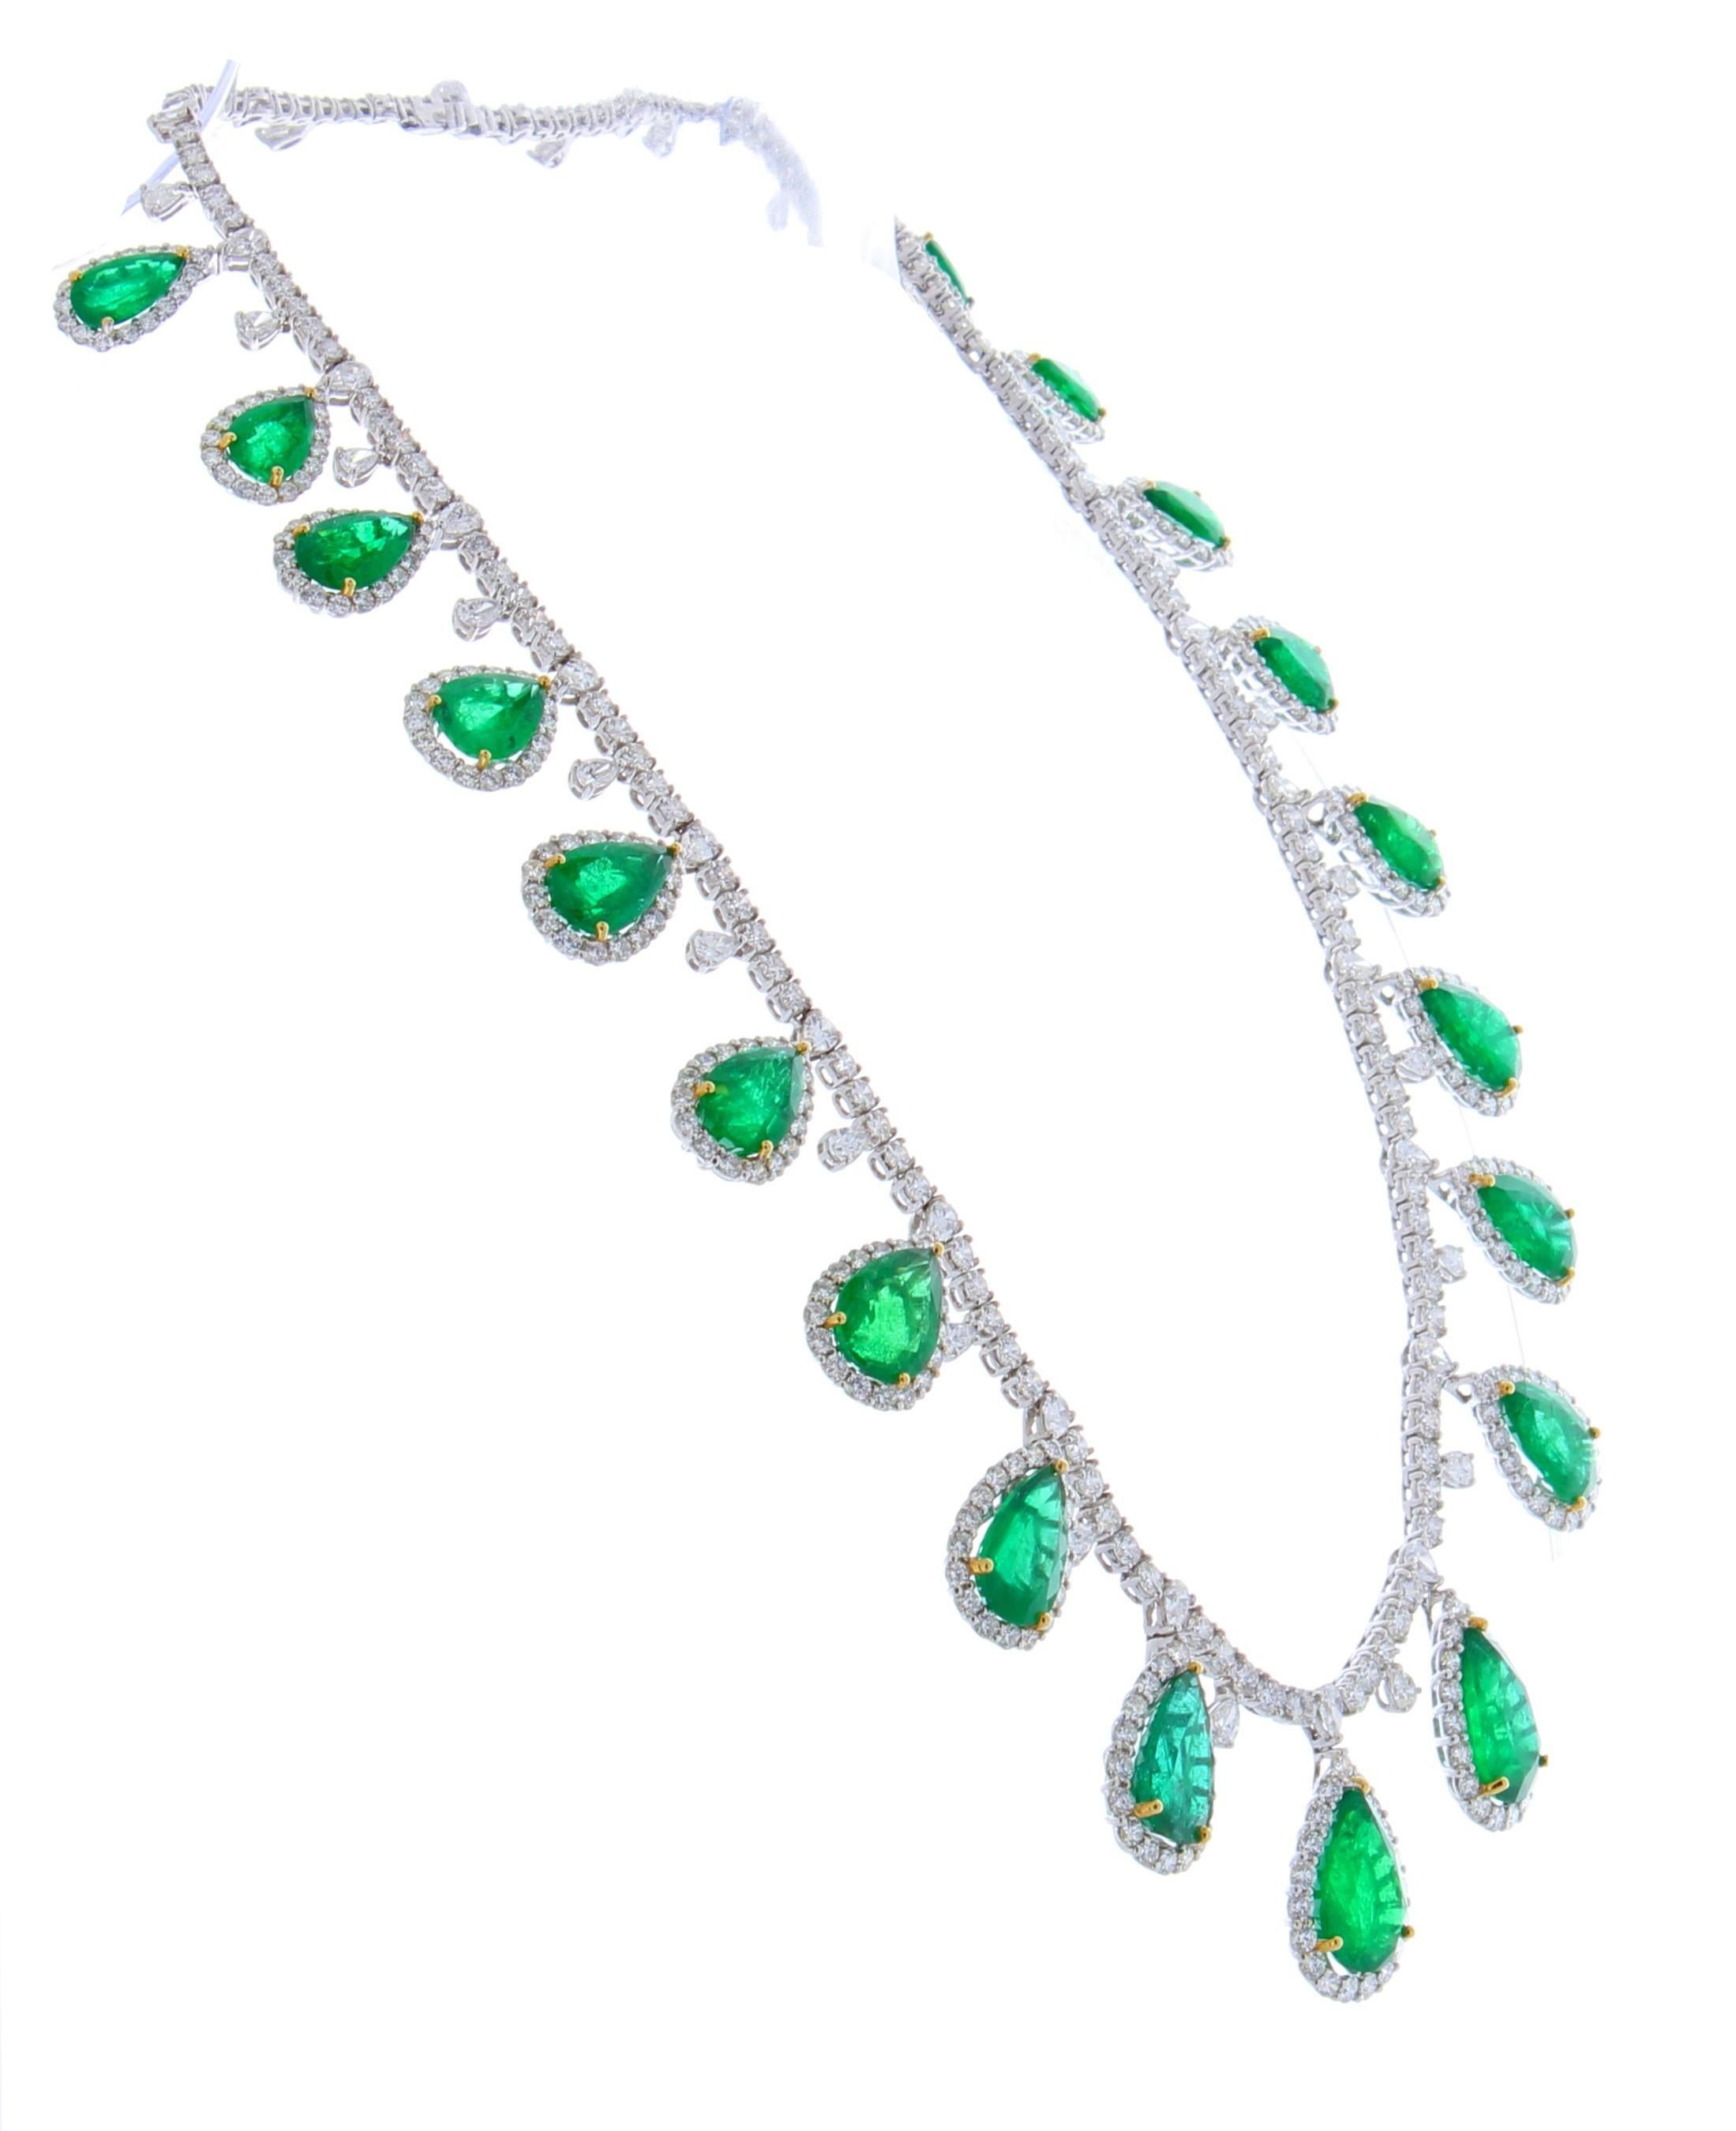 Contemporary 50.34 Carat Total Pear Shaped Emerald and Diamond Necklace in 18 Karat Gold